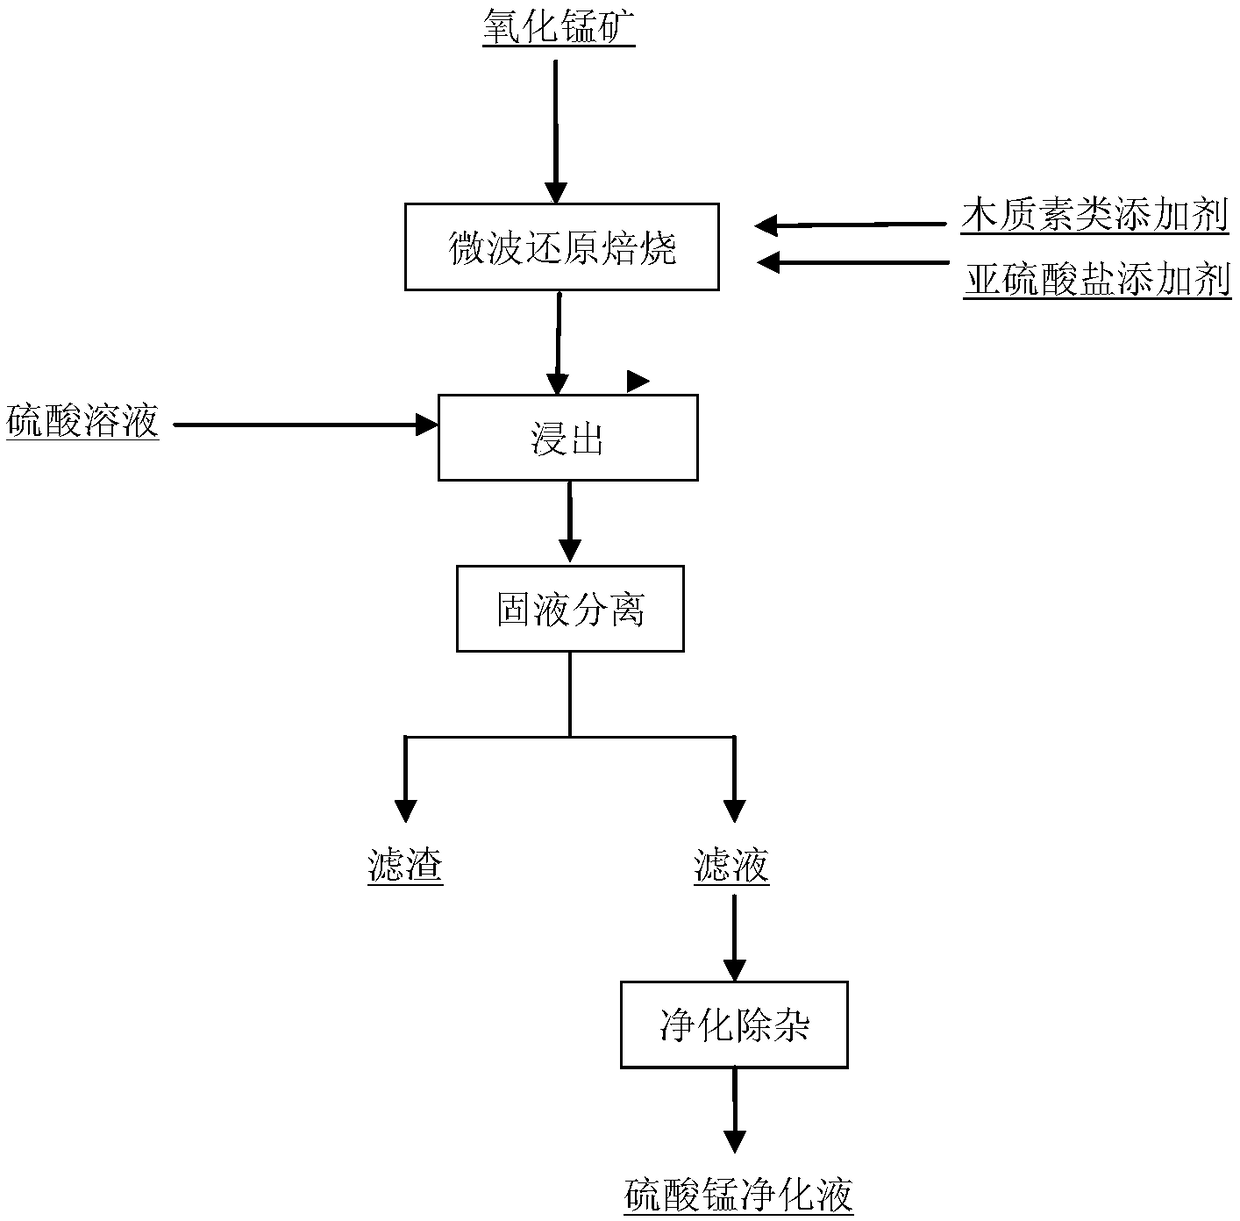 A kind of microwave reduction roasting and extraction method of manganese oxide ore